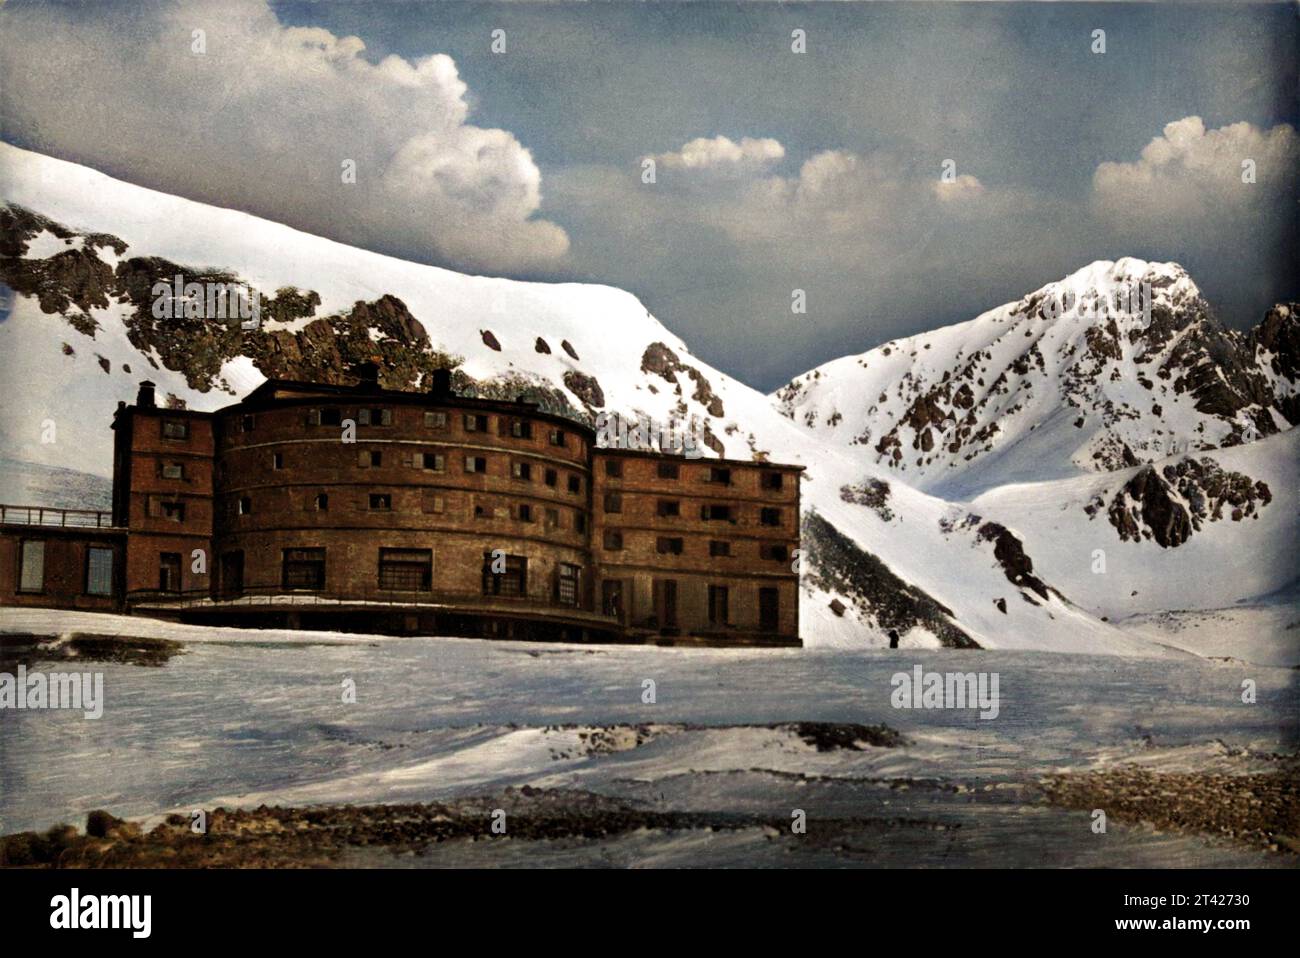 1950 c., CAMPO IMPERATORE , GRAN SASSO D'ITALIA , L'AQUILA, ABRUZZO , ITALY : The italian Fascist Duce BENITO MUSSOLINI was in prisony in Albergo Campo Imperatore ( Gran Sasso d'Italia , Abruzzo ) . In the day 12 semptember 1943 ) was saved by german militaries on order by ADOLF HITLER . It was built in the 1930s based on a design by the Piedmontese engineer Vittorio Bonadè Bottino , who in the same years designed the hotel structures in Sestriere and the Principi di Piemonte hotel in Turin . Unknown photographer . DIGITALLY COLORIZED . - HISTORY - FOTO STORICHE - GEOGRAPHY - GEOGRAFIA - MONTA Stock Photo